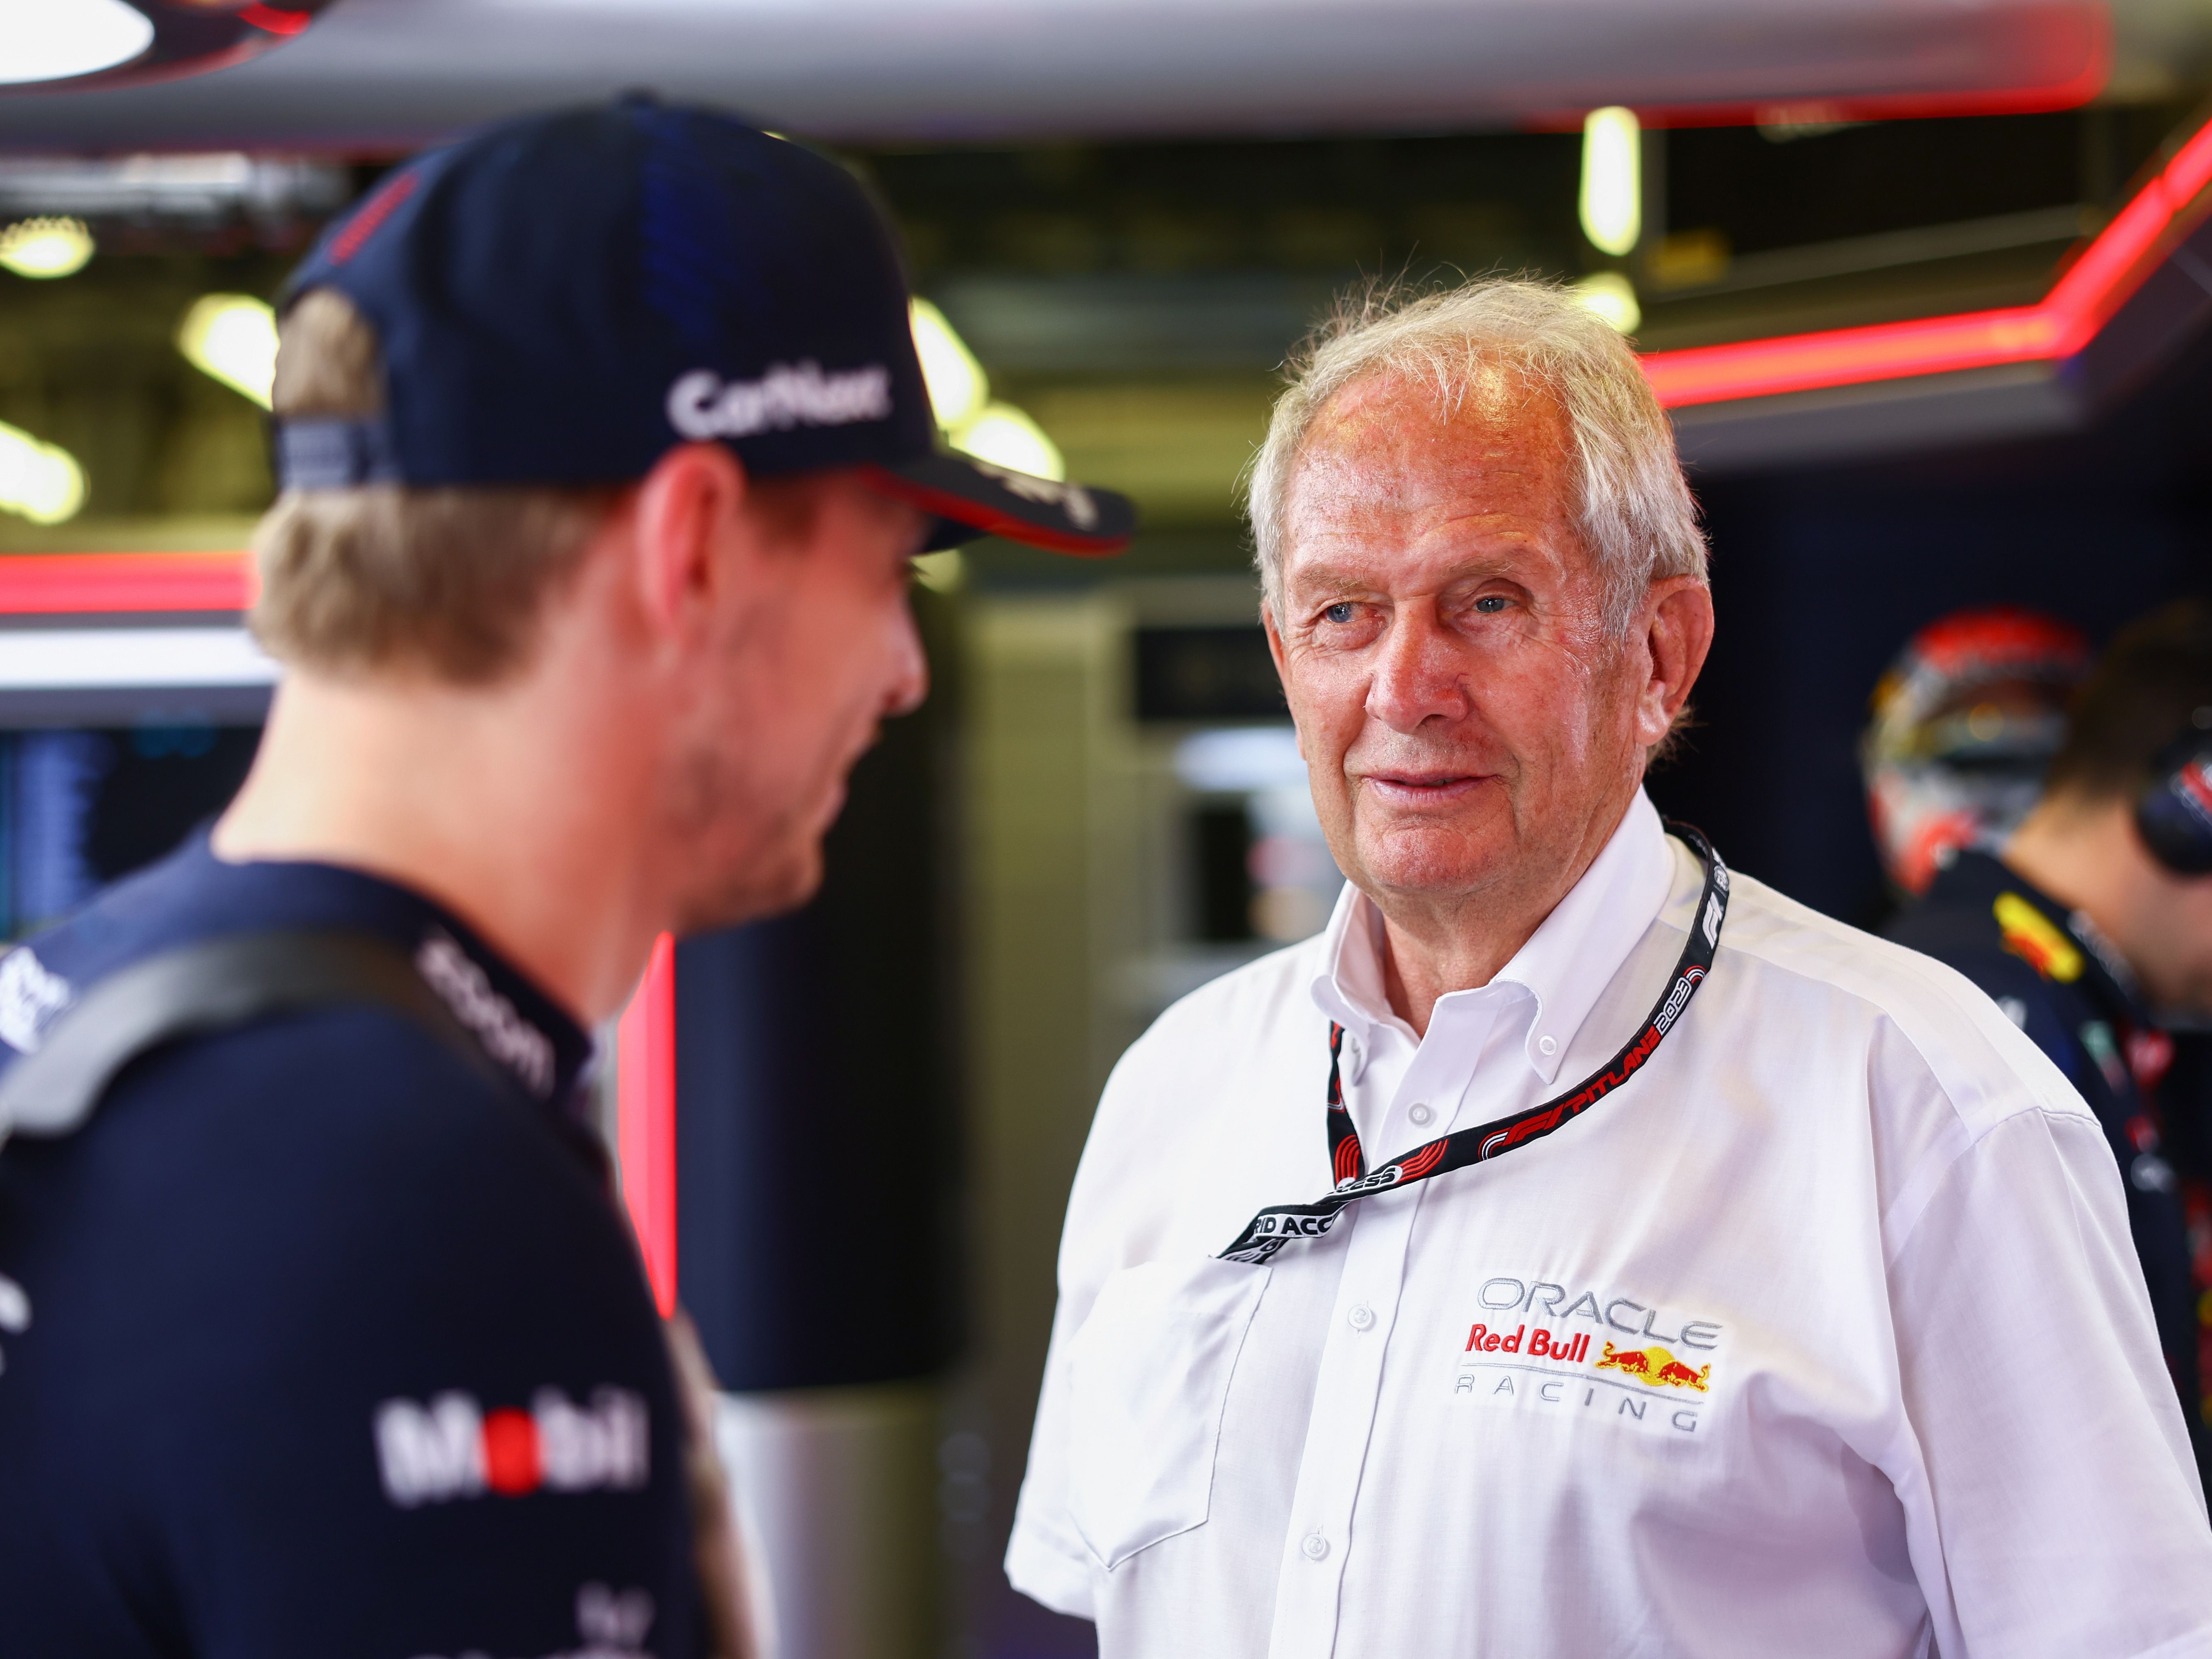 F1 Grand Prix of AzerbaijanRed Bull Racing Team Consultant Dr Helmut Marko talks with Max Verstappen in the garage prior to the 2023 F1 Azerbaijan Grand Prix. (Photo by Mark Thompson/Getty Images)